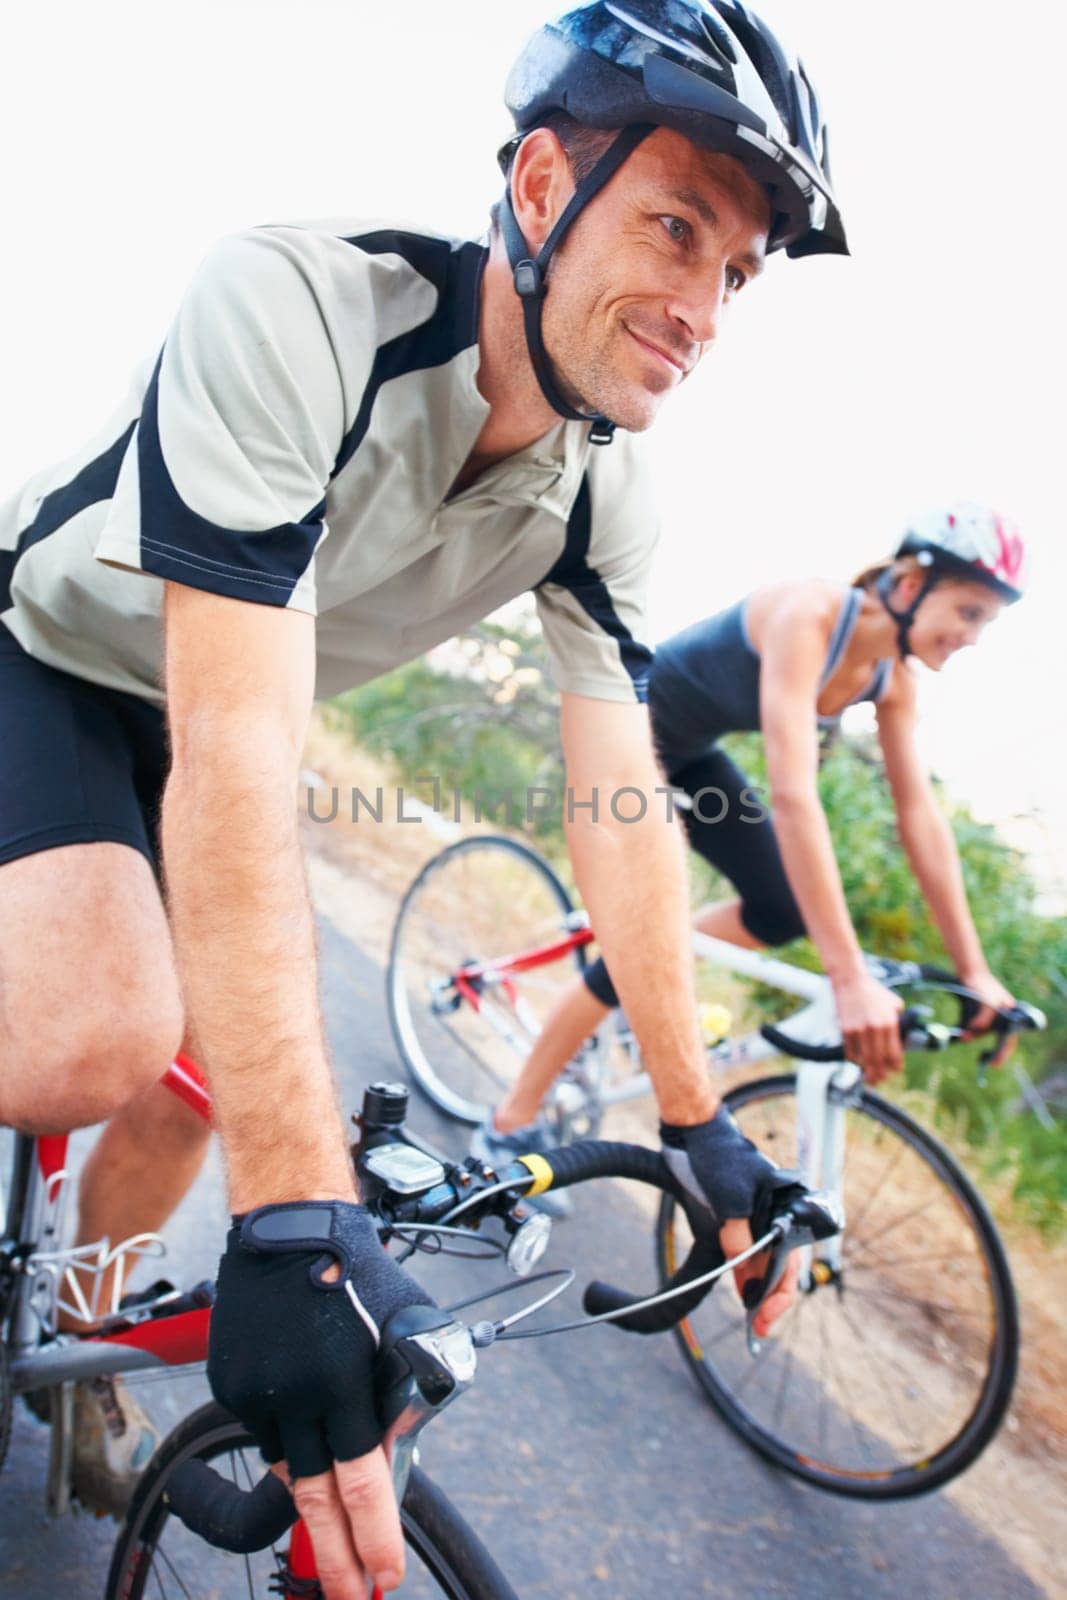 Happy, couple and cycling on road in nature for cardio, fitness and training on bicycle together. Outdoor, people and exercise on bike for fun, workout and travel in countryside adventure or journey.